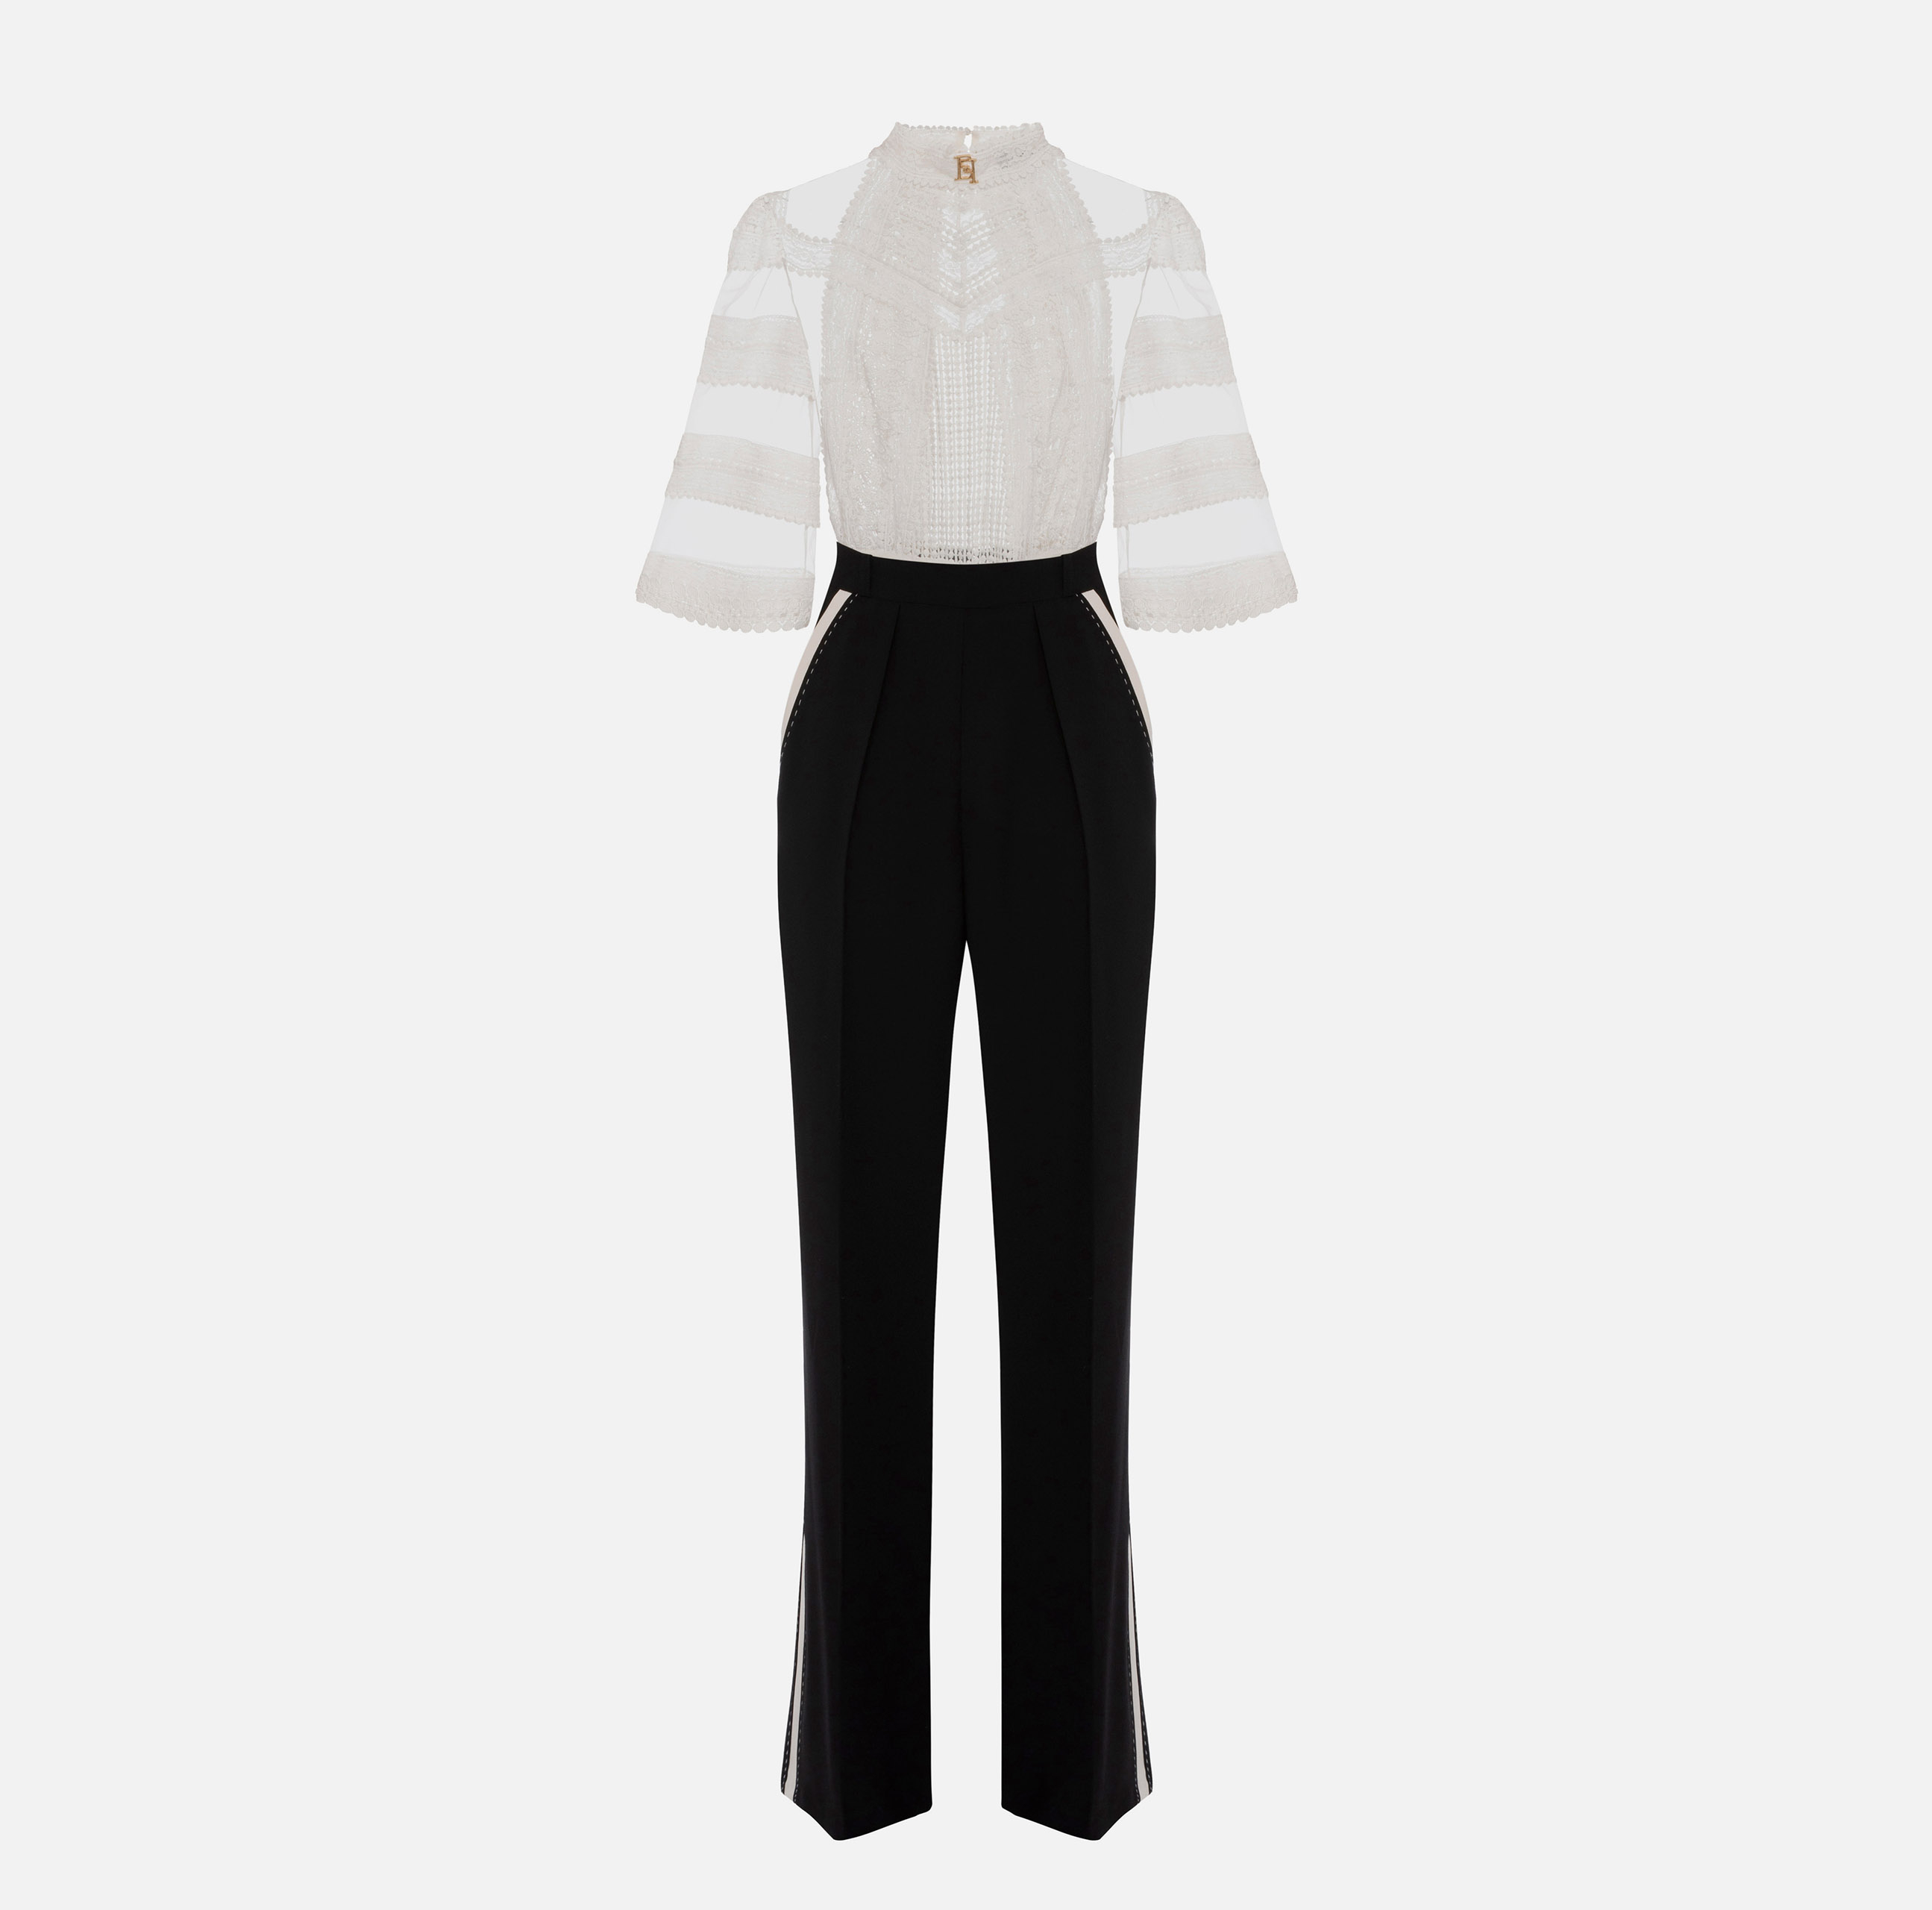 Jumpsuit in crêpe fabric with shirt top in macramé lace - Elisabetta Franchi